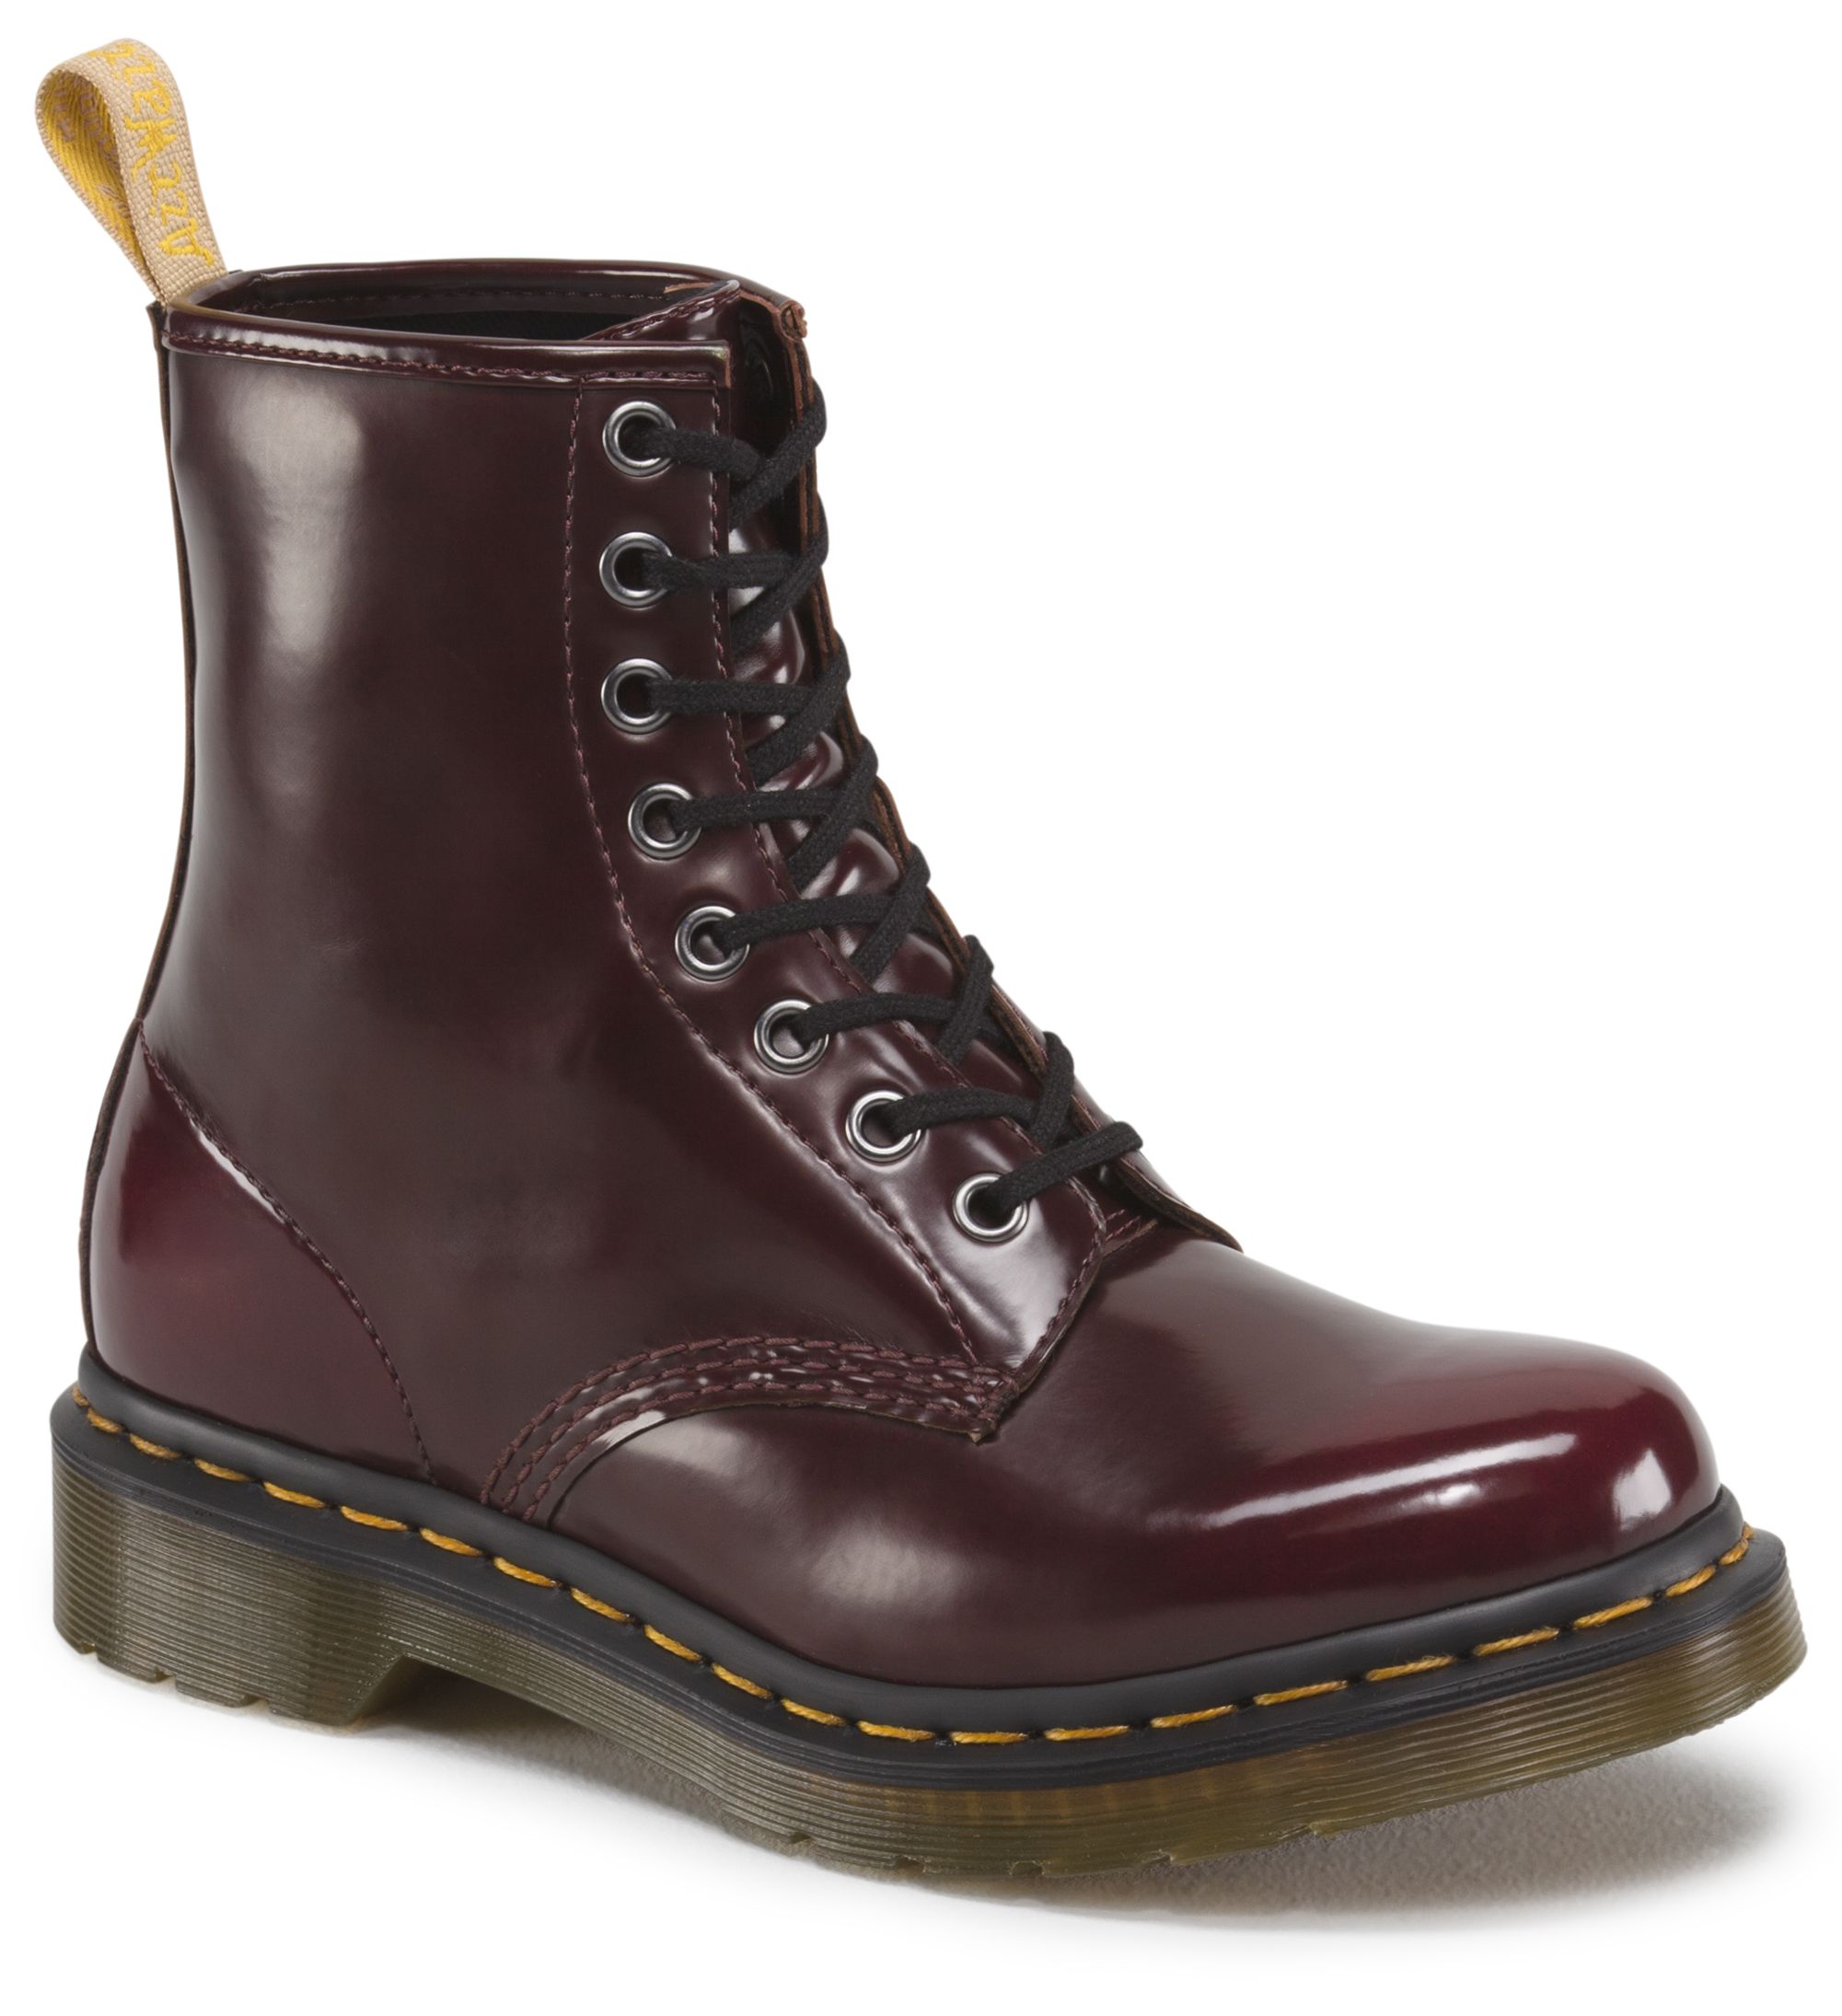 Dr. Martens Vegan Boots Recalled by Airwair Due to Chemical Exposure ...